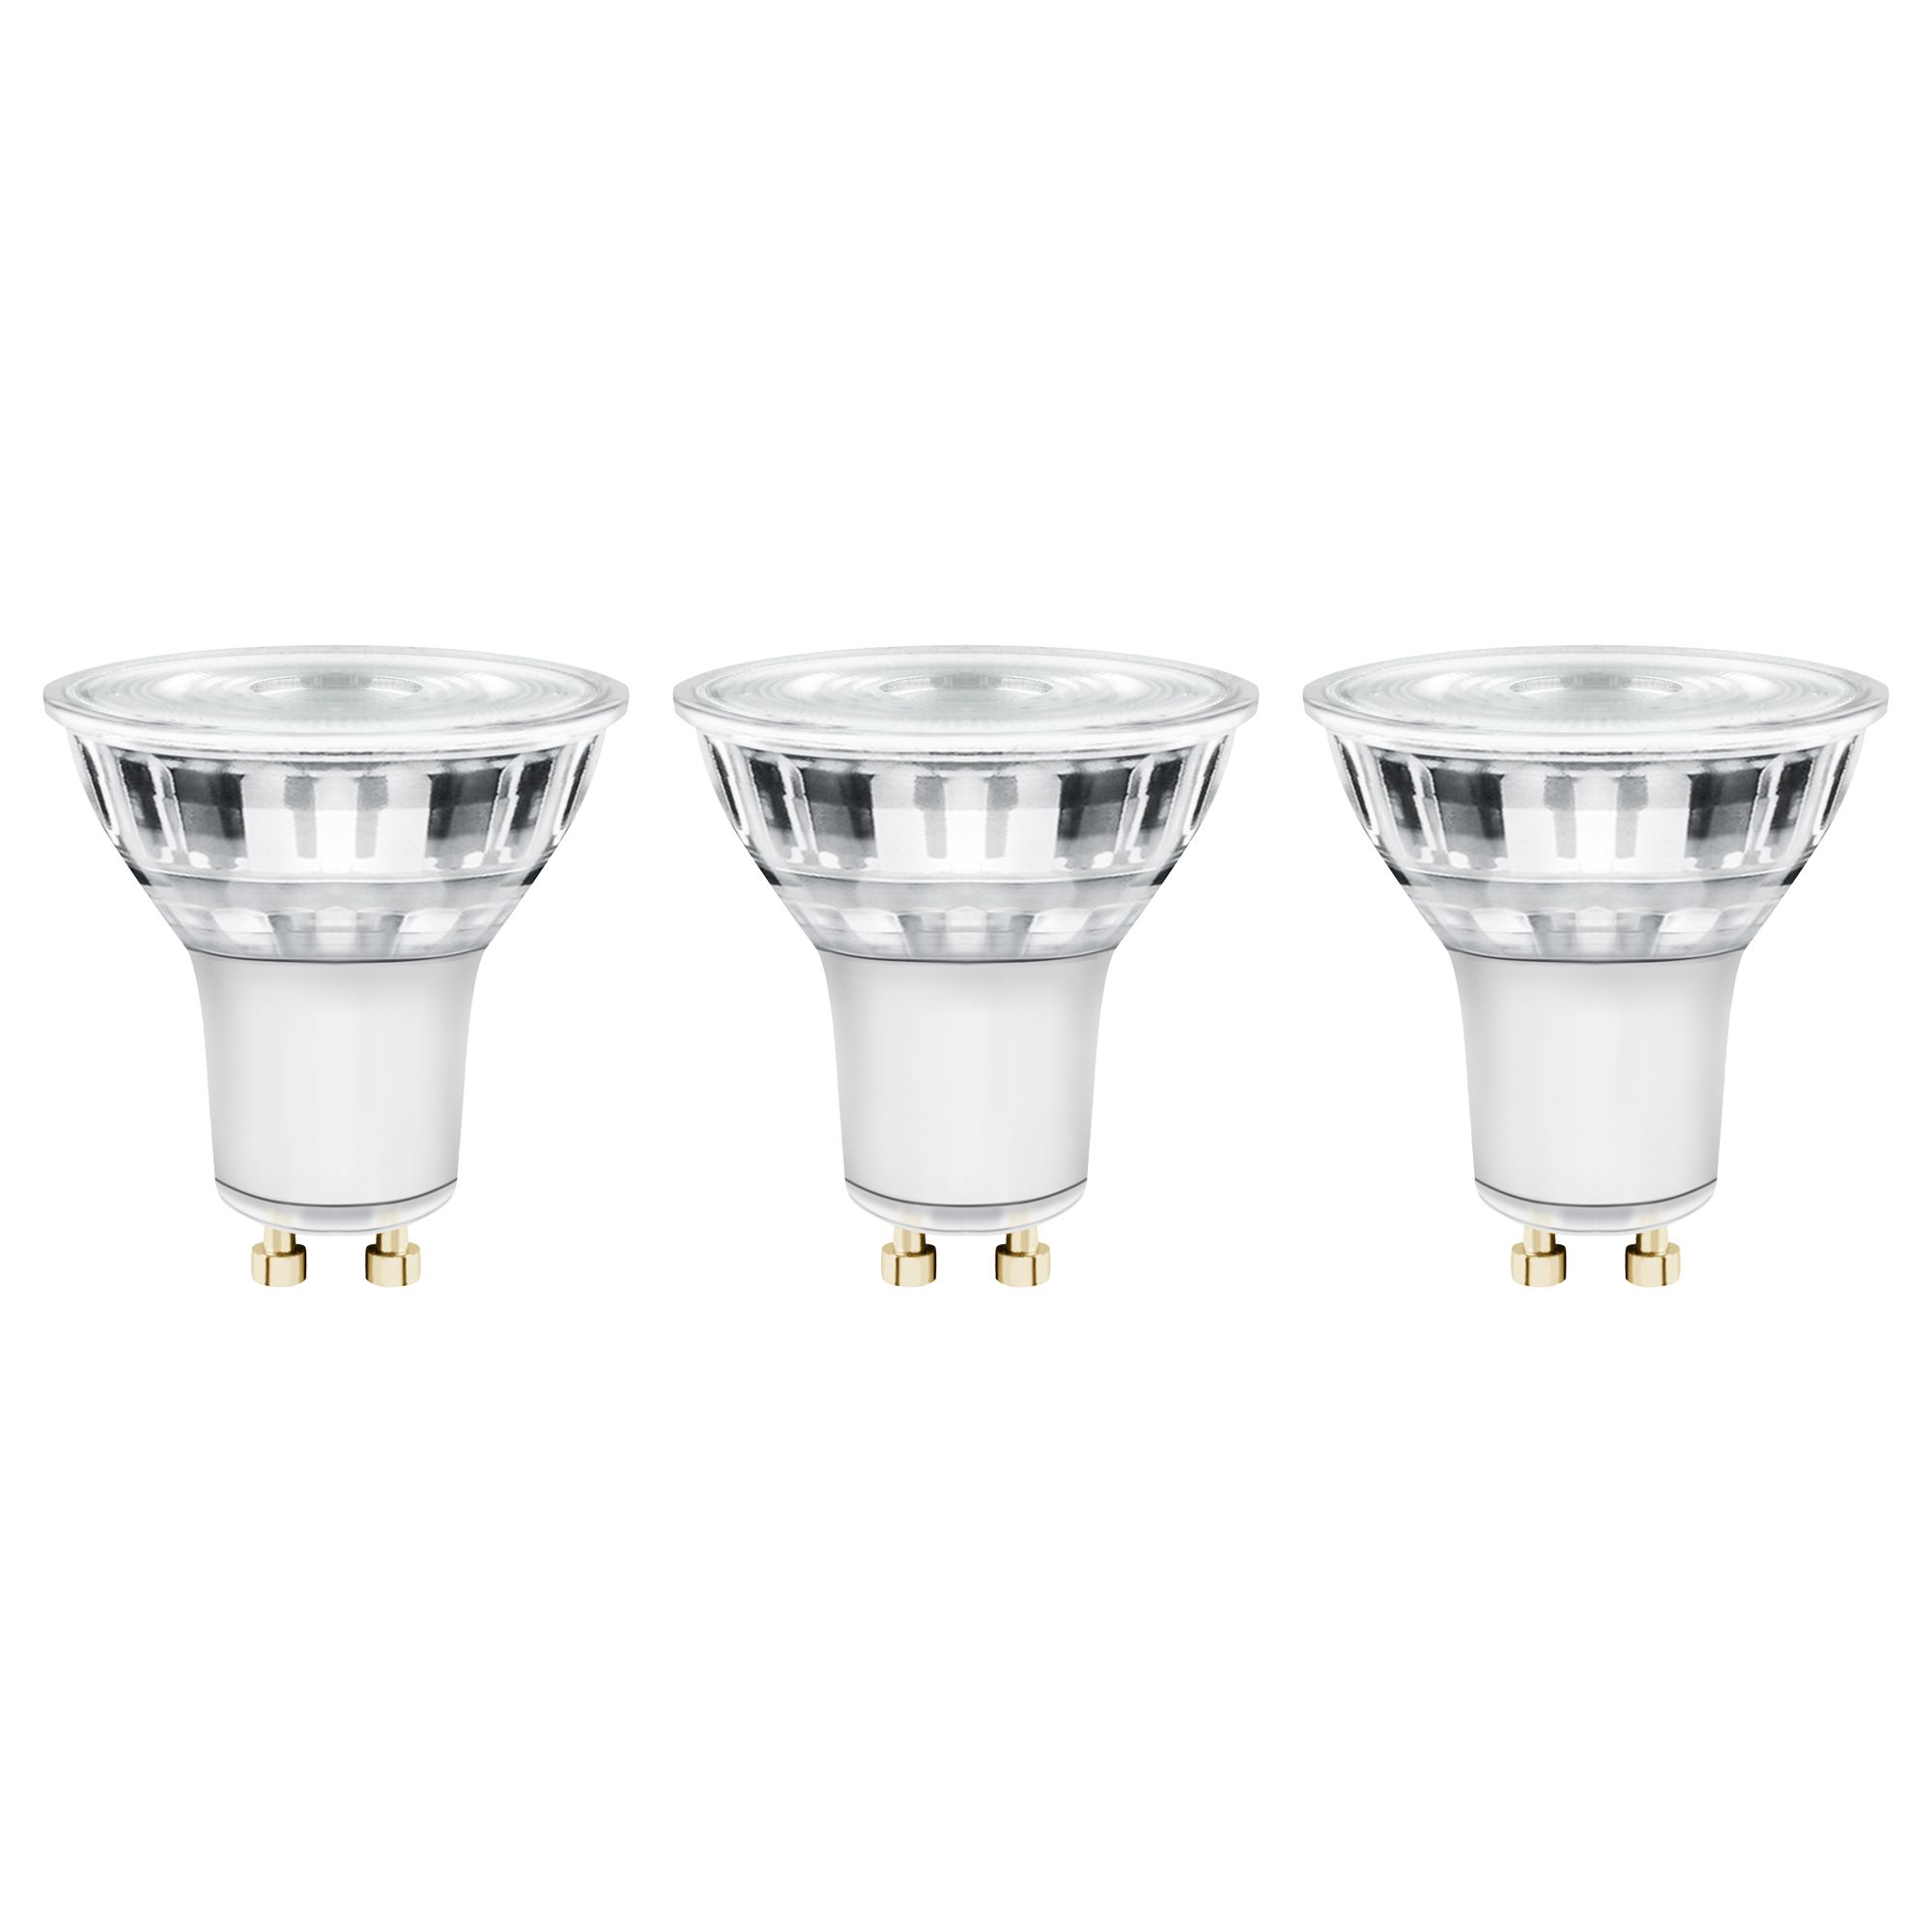 Diall 2.4W 230lm Clear Reflector spot Warm white LED Light bulb, Pack of 3